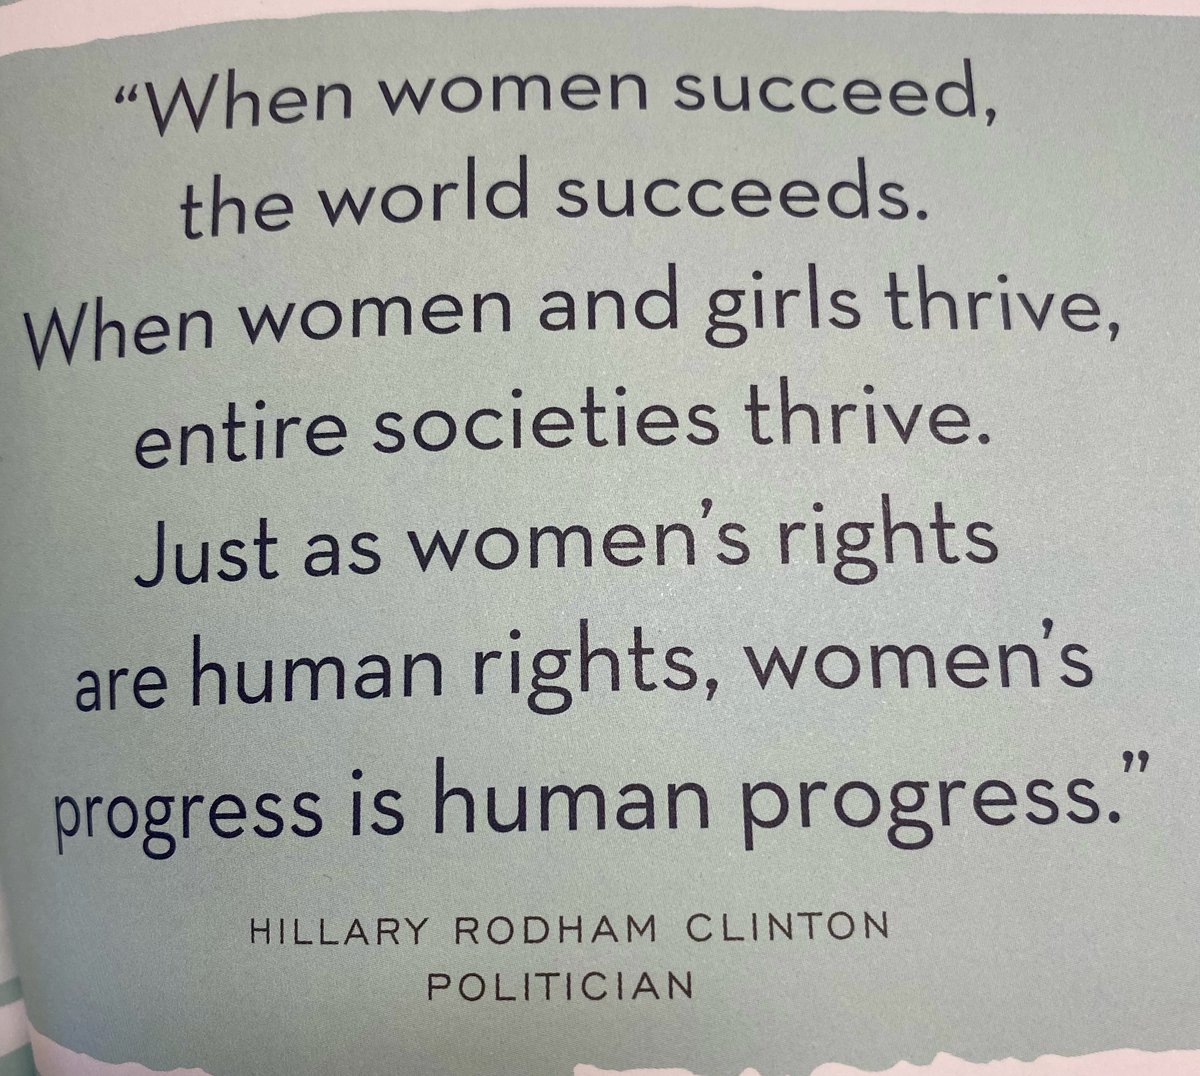 As Women's History Month concludes, I post an incredible sentiment from Hillary Rodham Clinton. So true - our progress is human progress...and the world is a better place for it. #WomensHistoryMonth